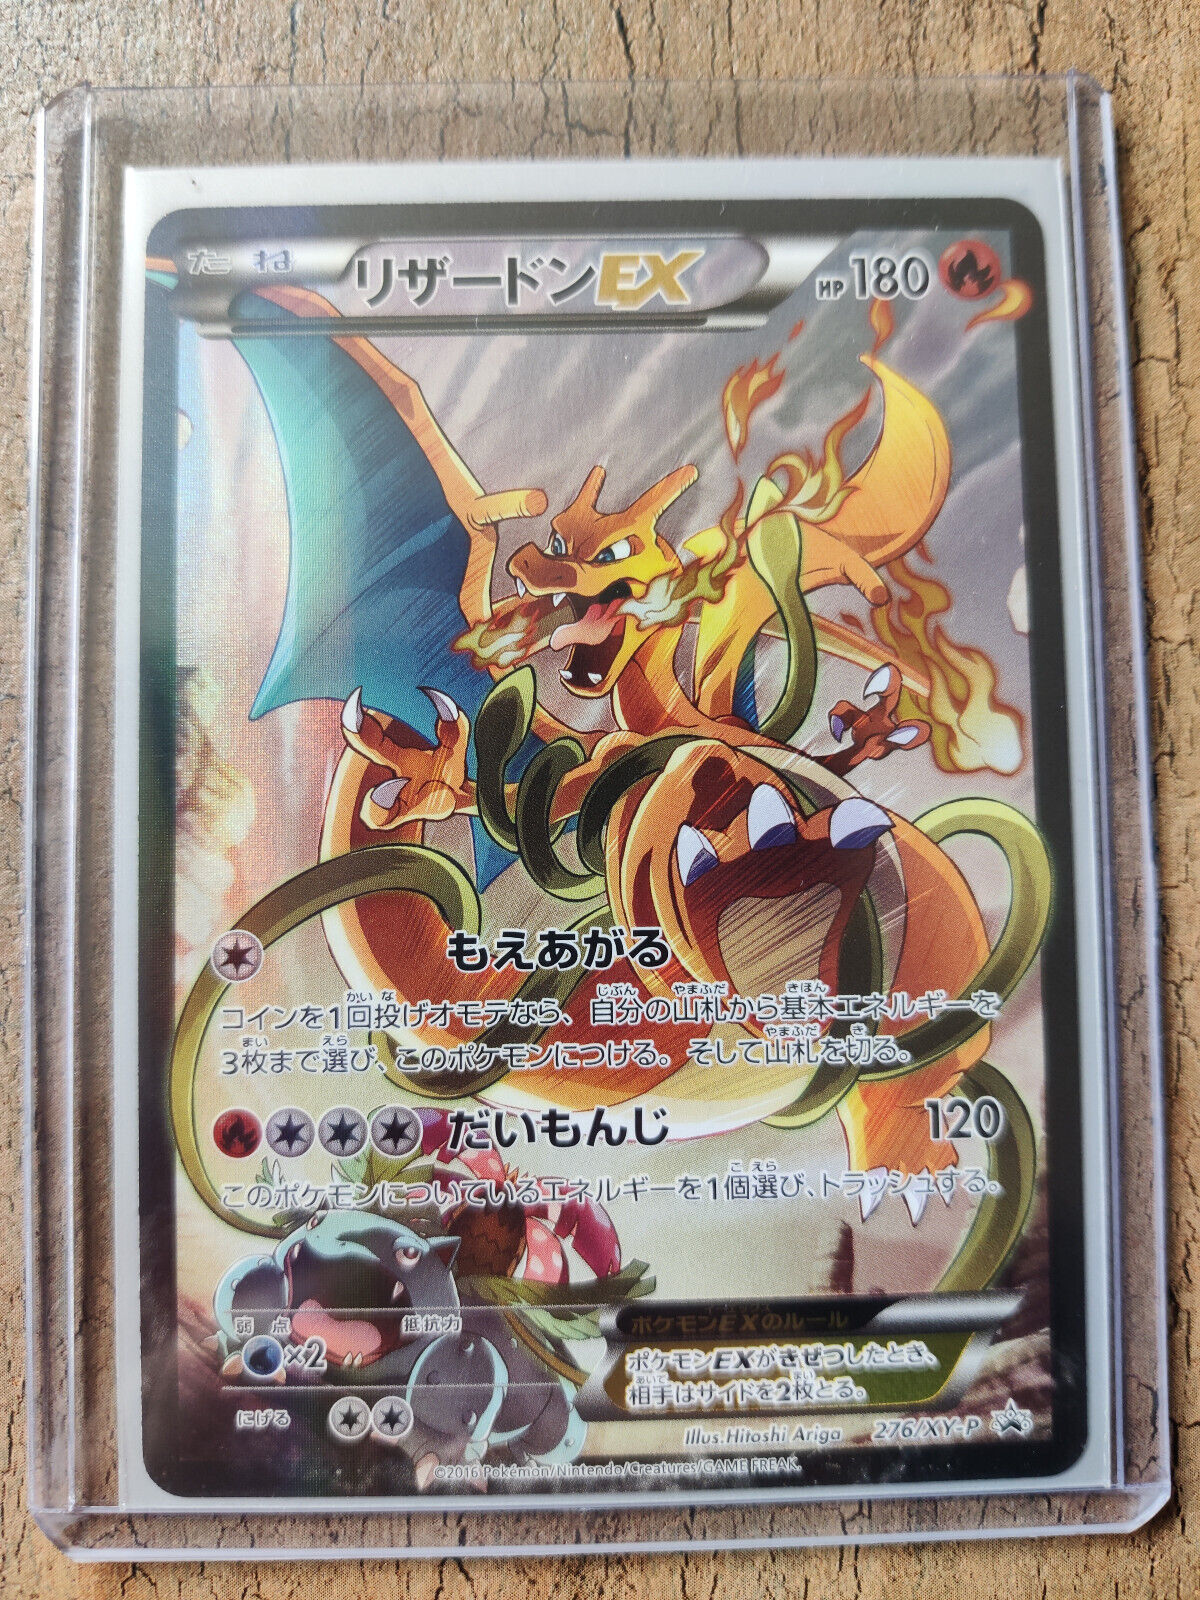 Charizard 276 XYP  Pokemon Card Game Art Collection Artbook